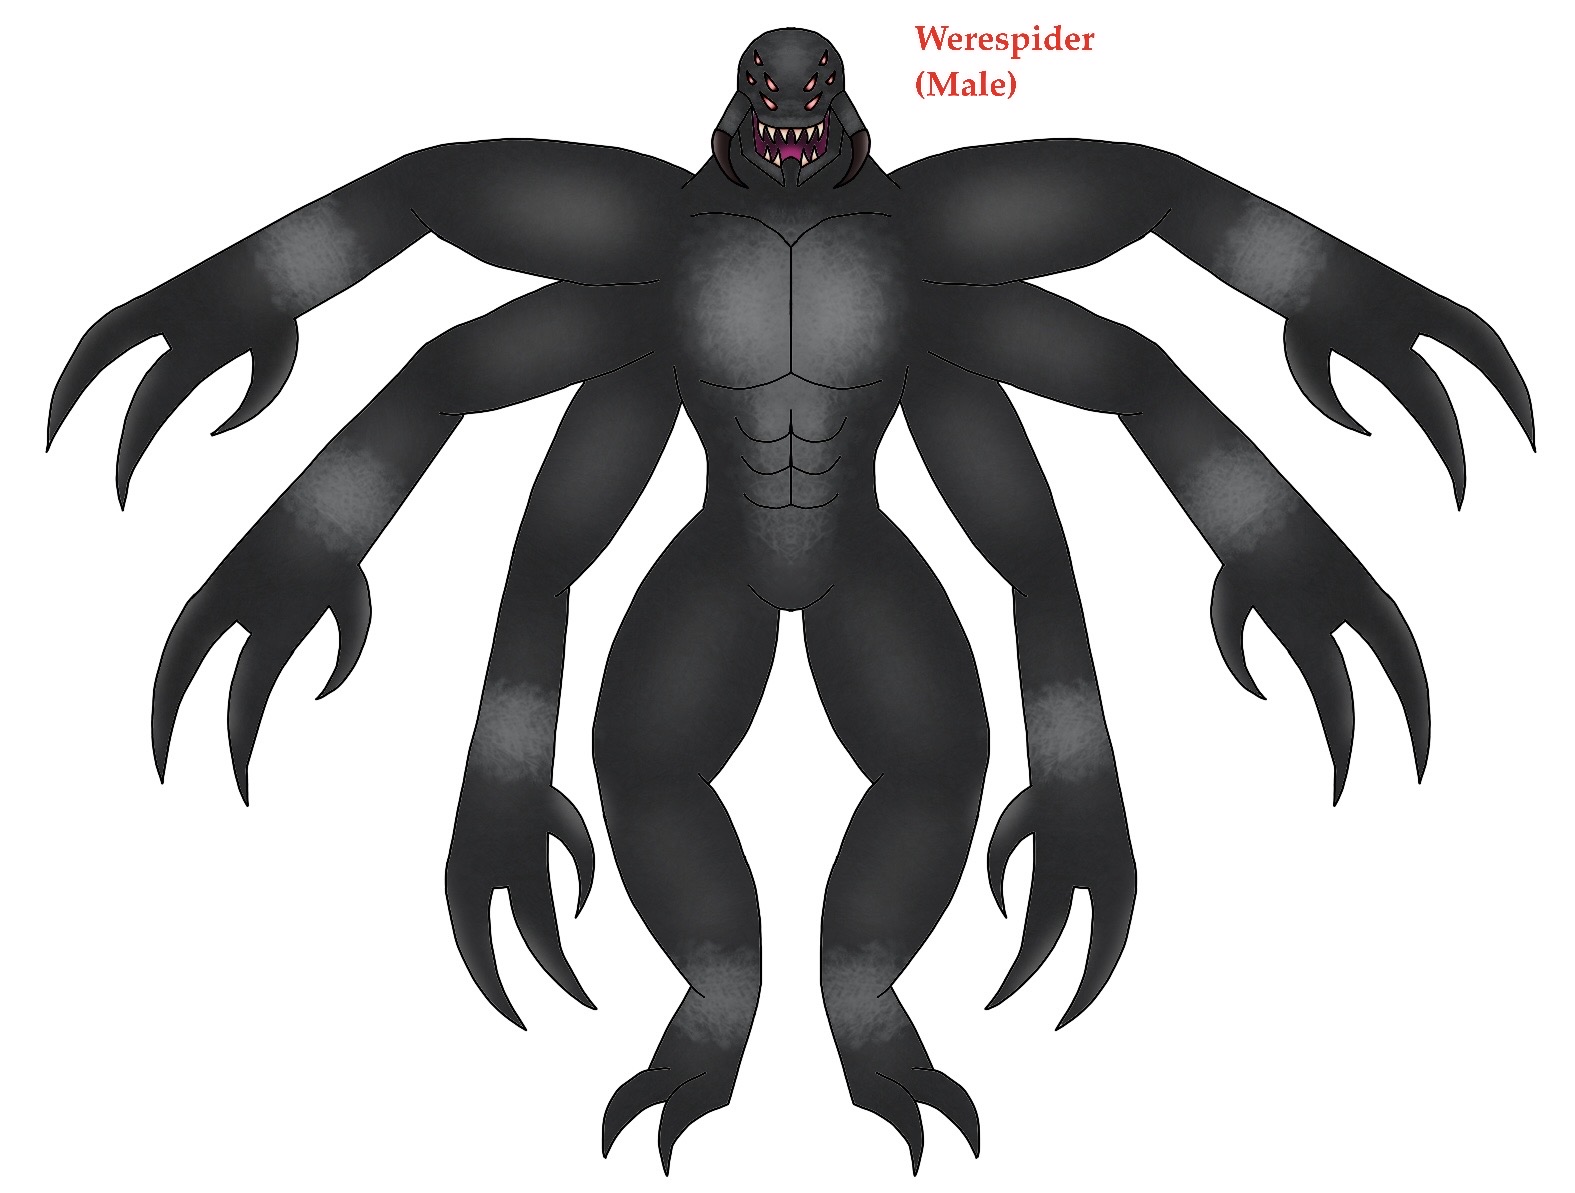 Werespider (Male) by LordOverCharge on DeviantArt